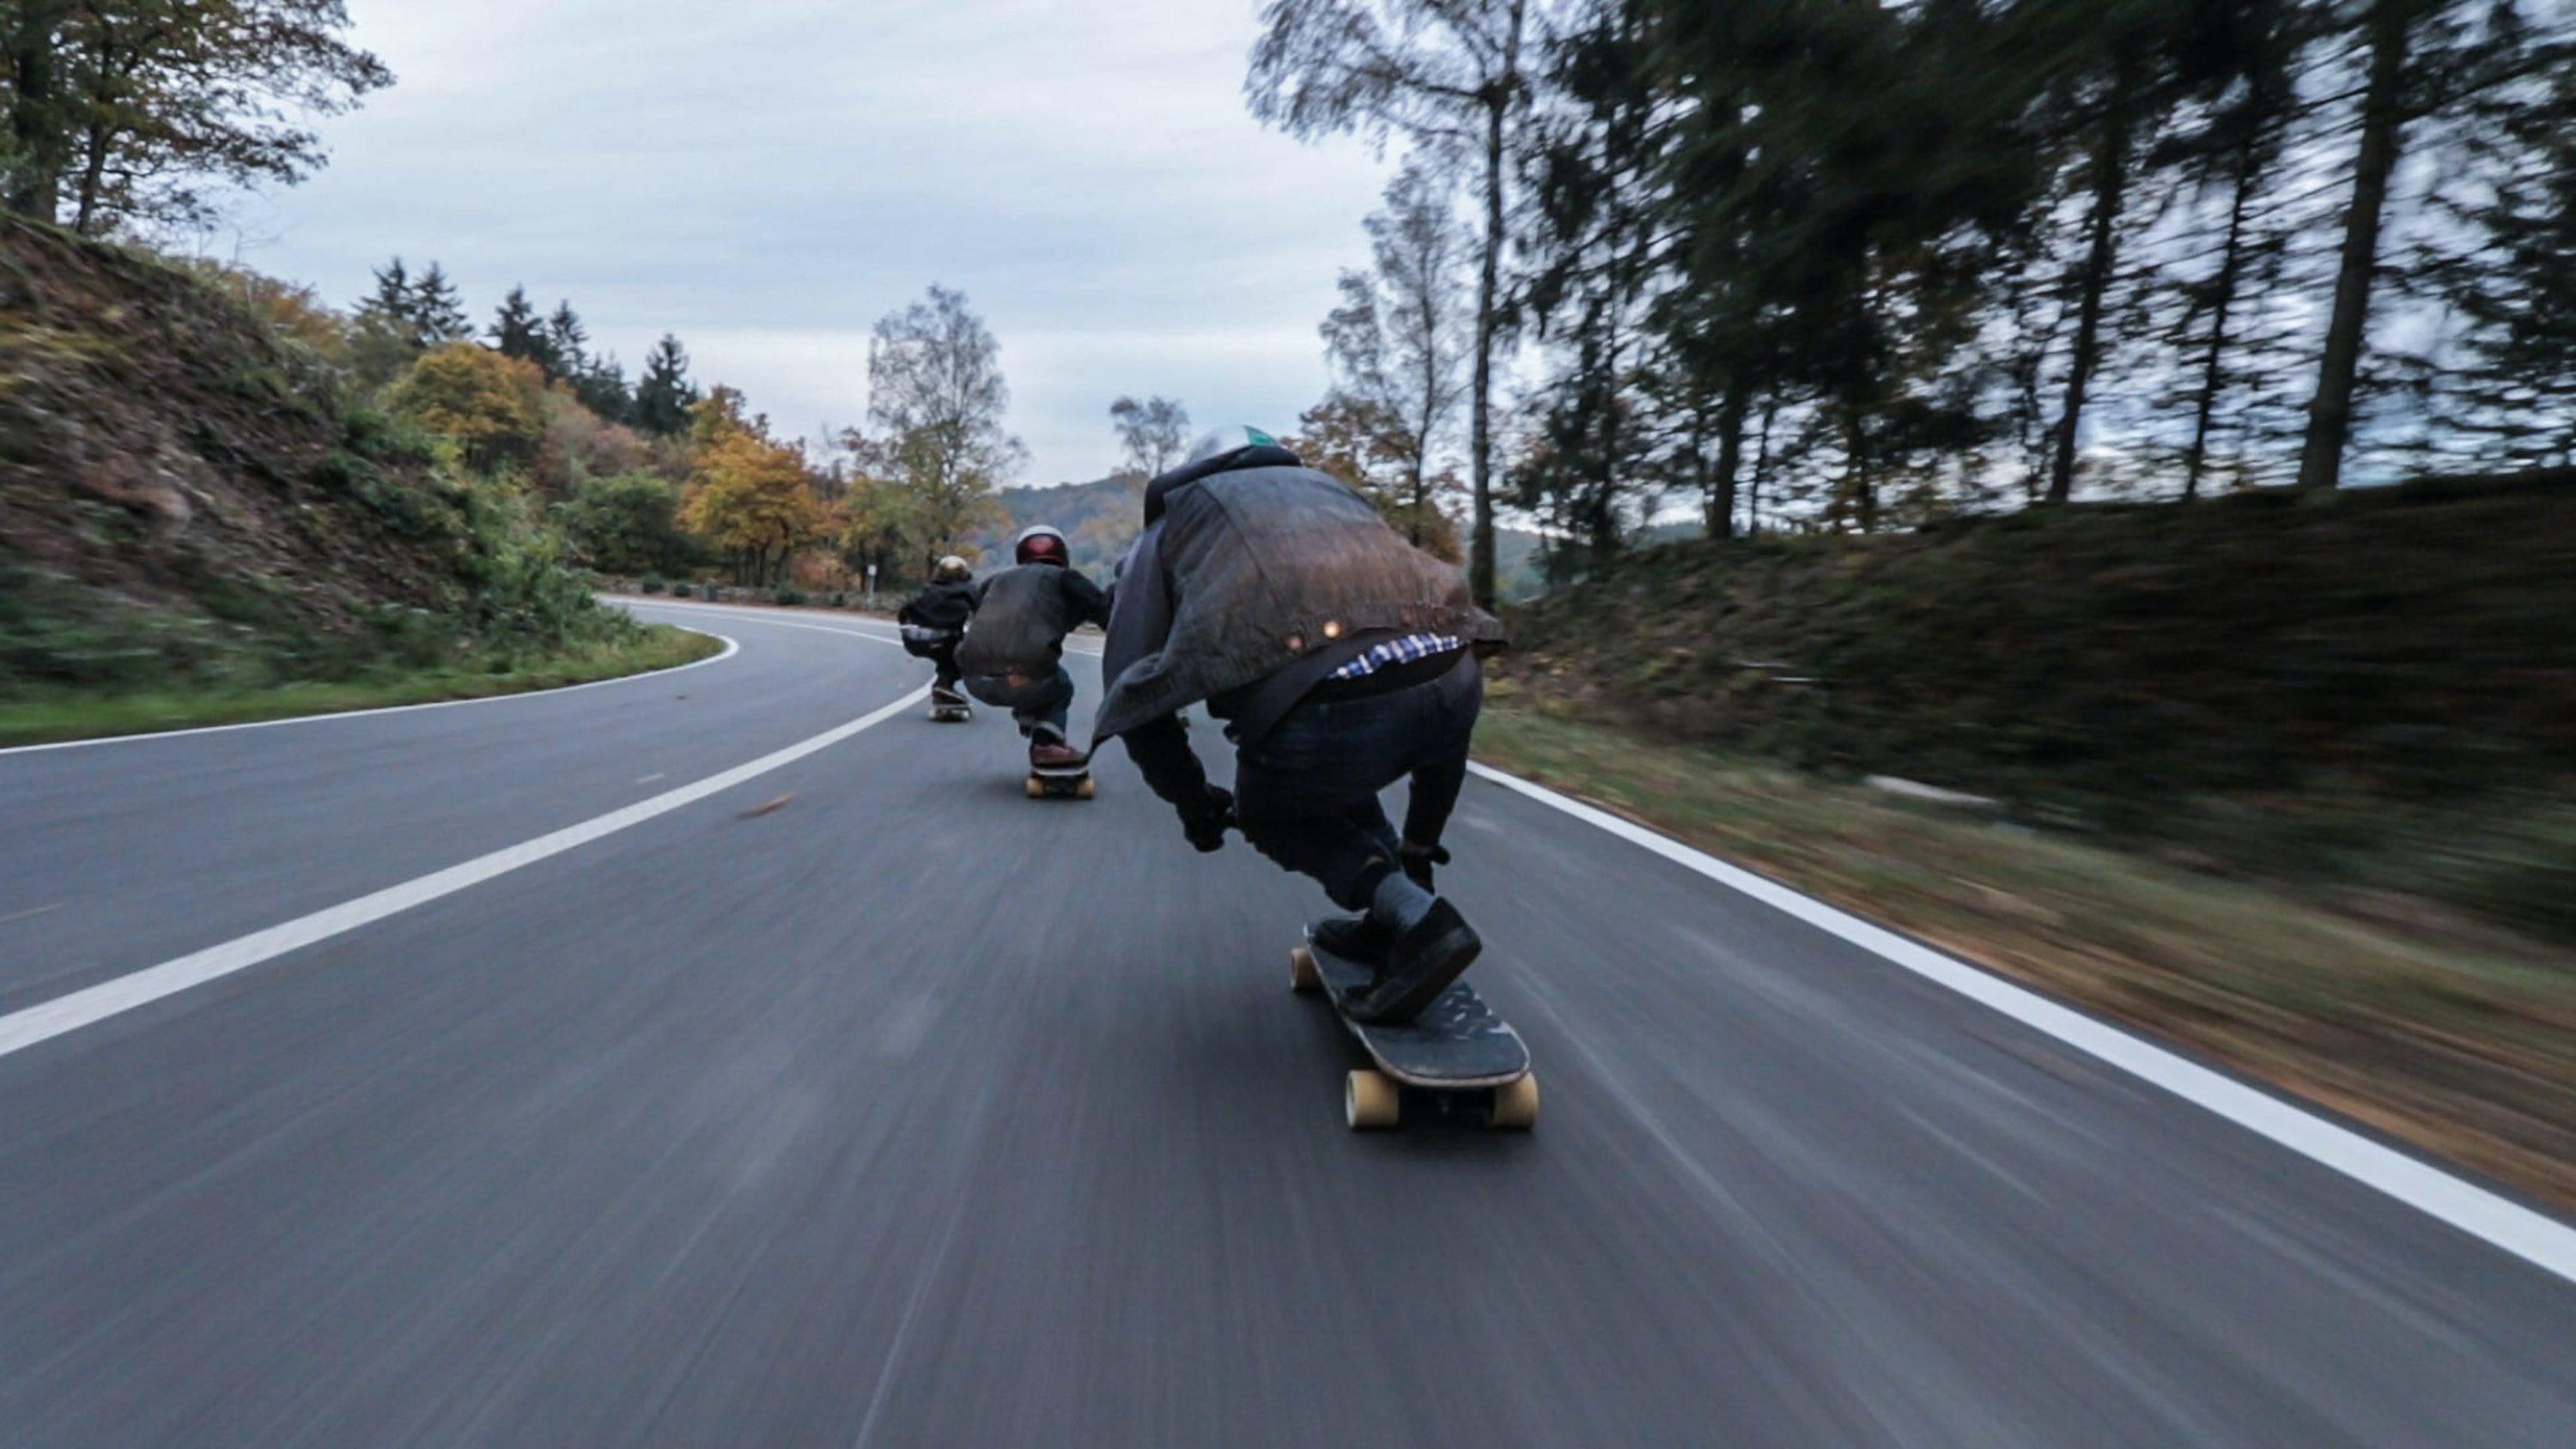 Racing down hill on electric skateboards